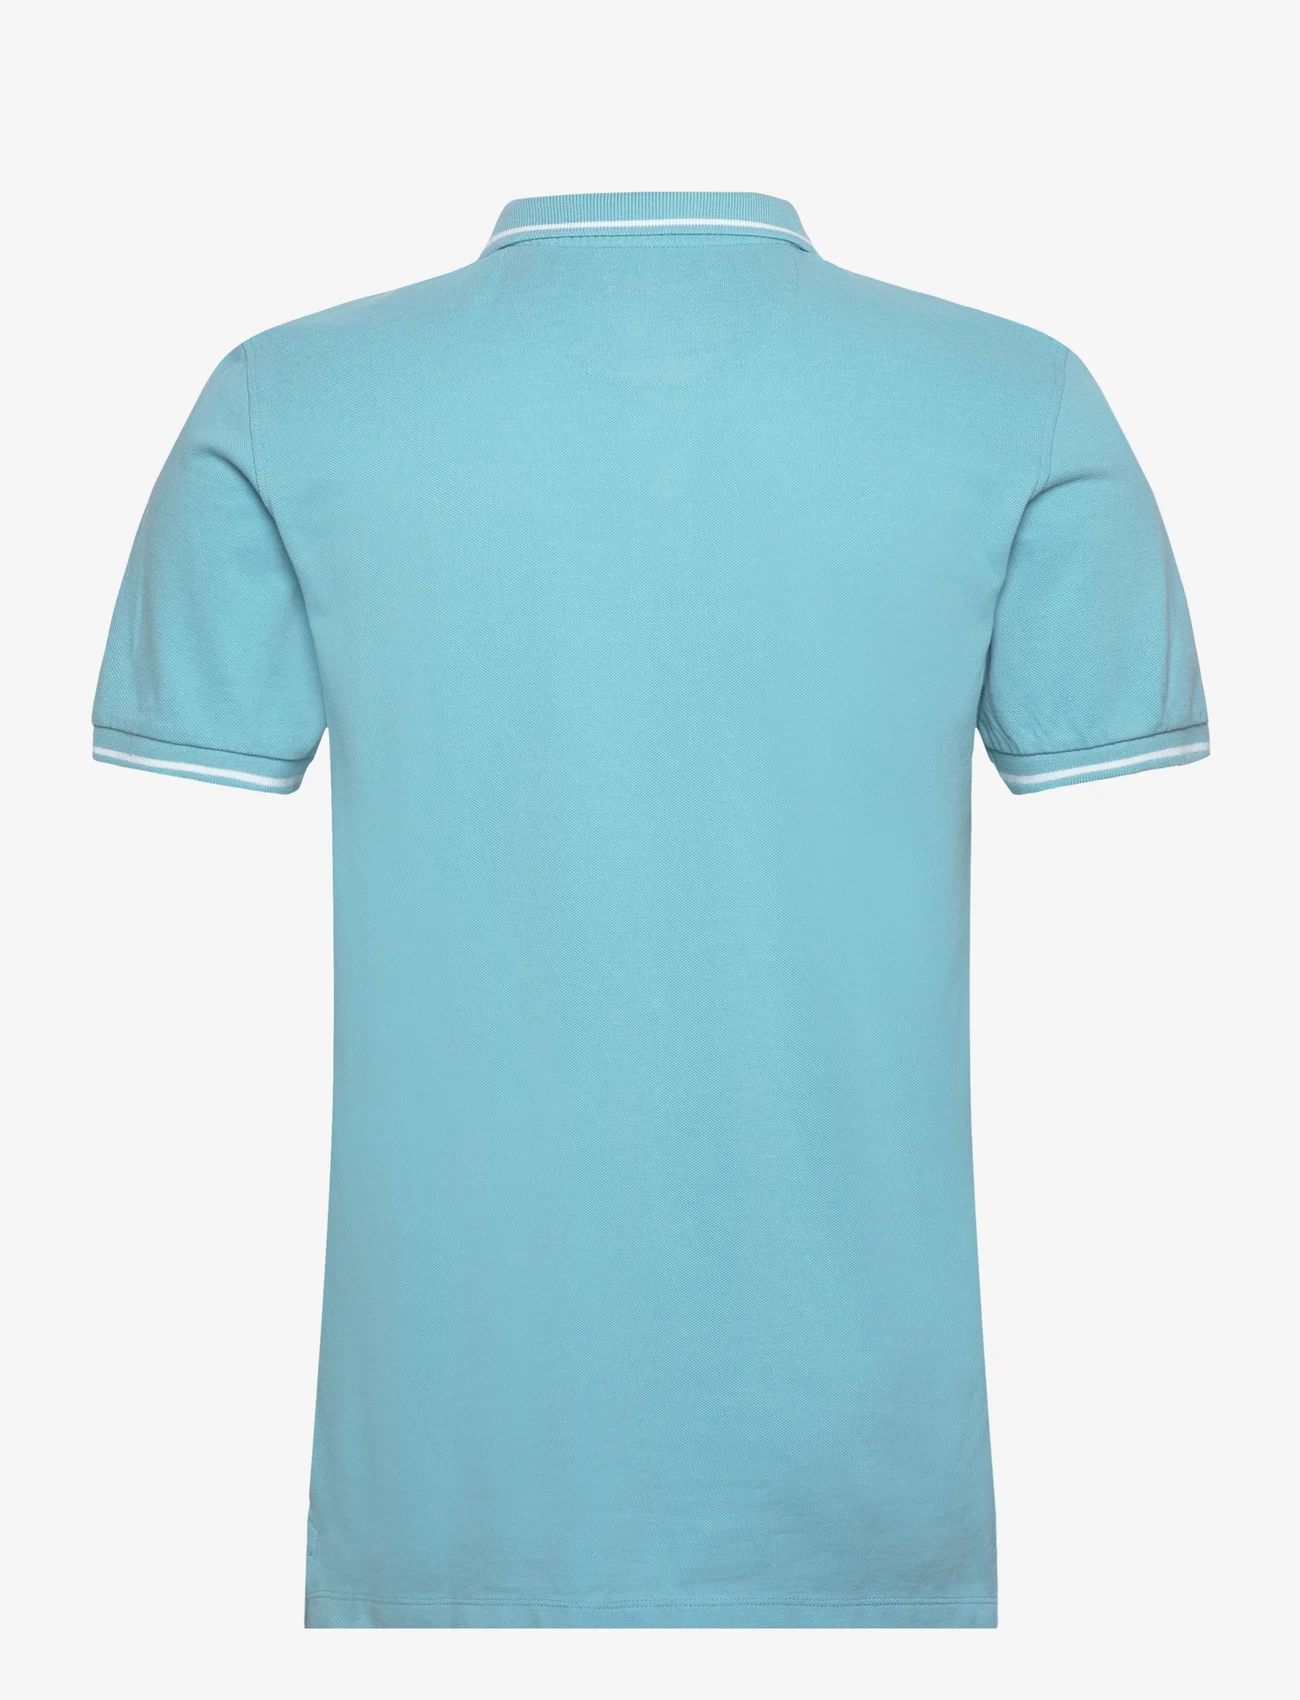 Lee Jeans - PIQUE POLO - short-sleeved polos - preppy blue - 1